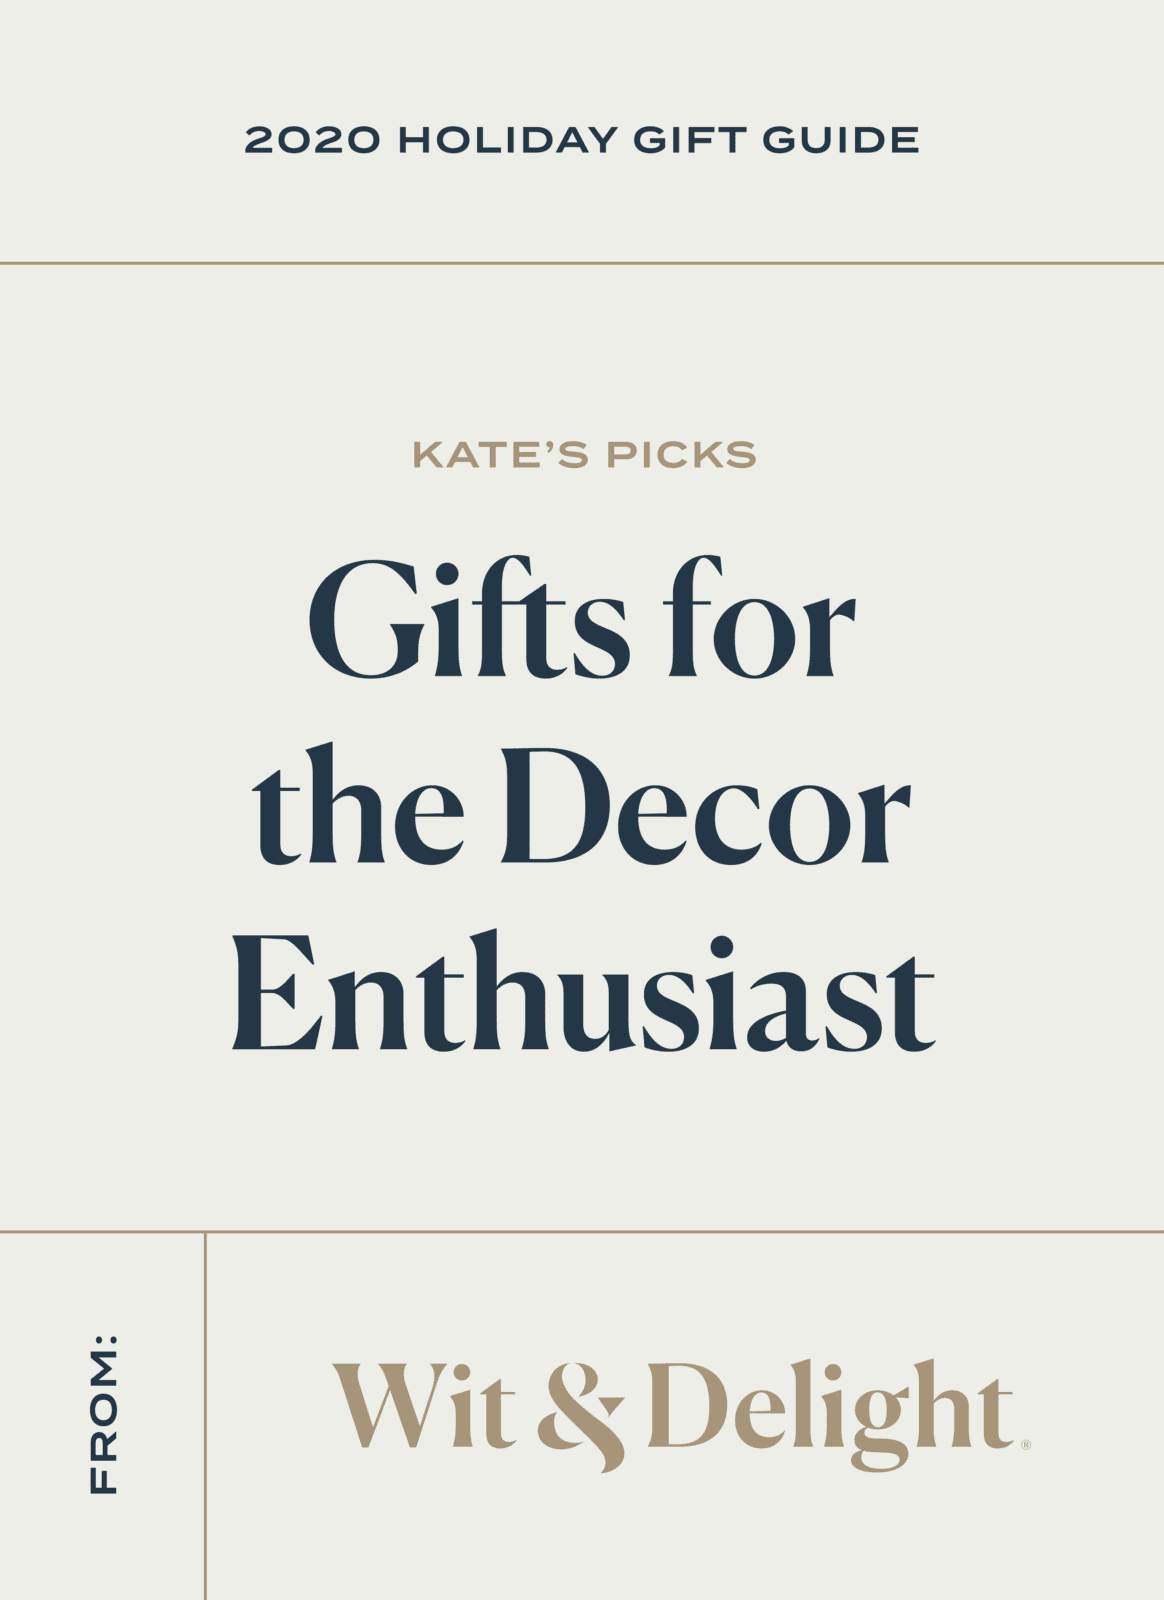 W&D 2020 Holiday Gift Guide: 13 Gifts for the Decor Enthusiast